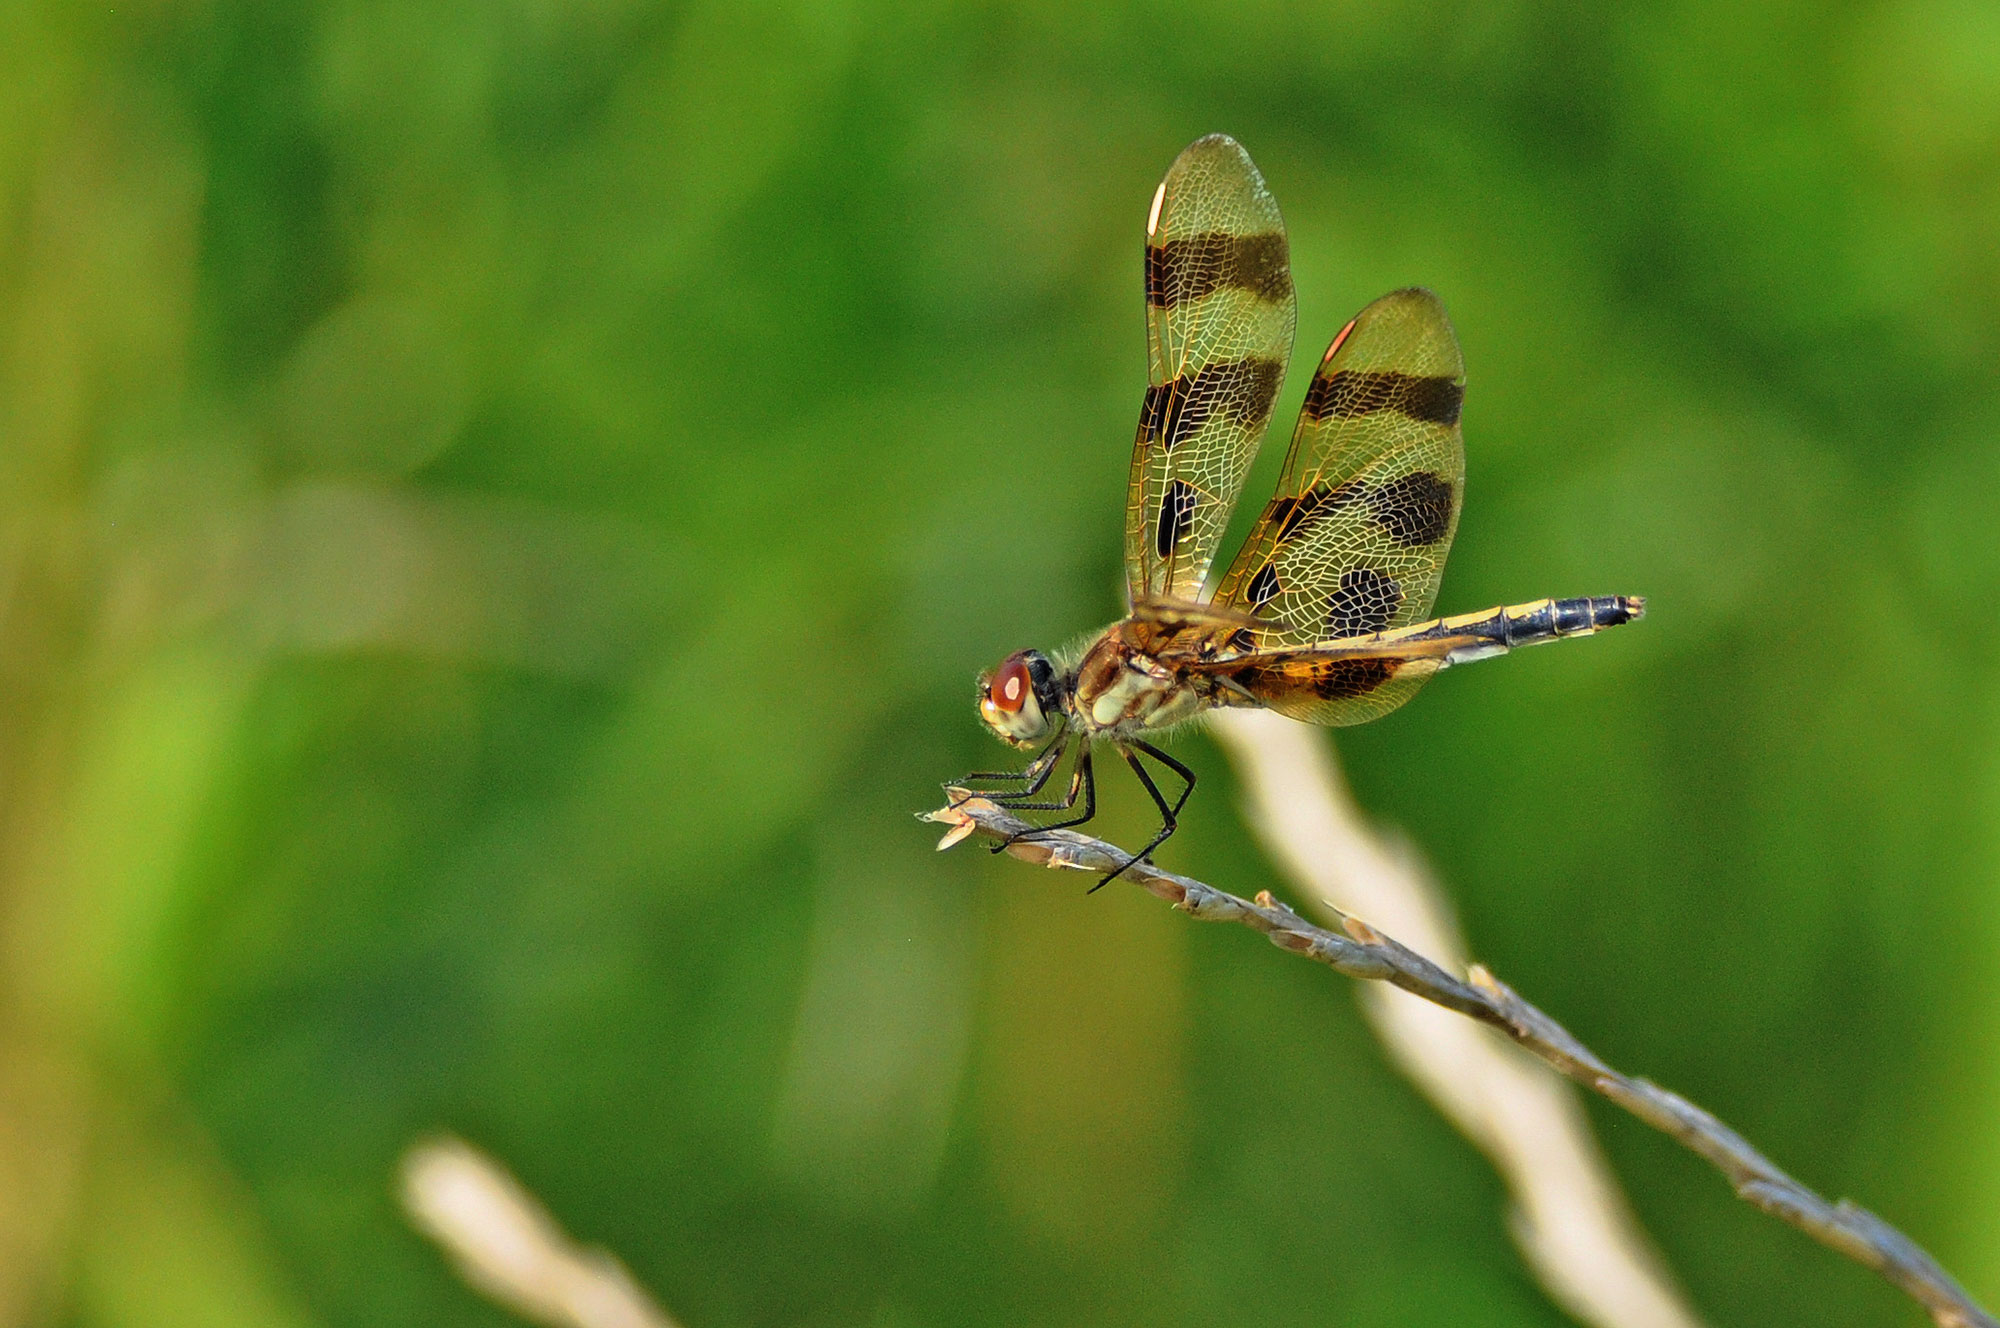 The Halloween pennant dragonfly.